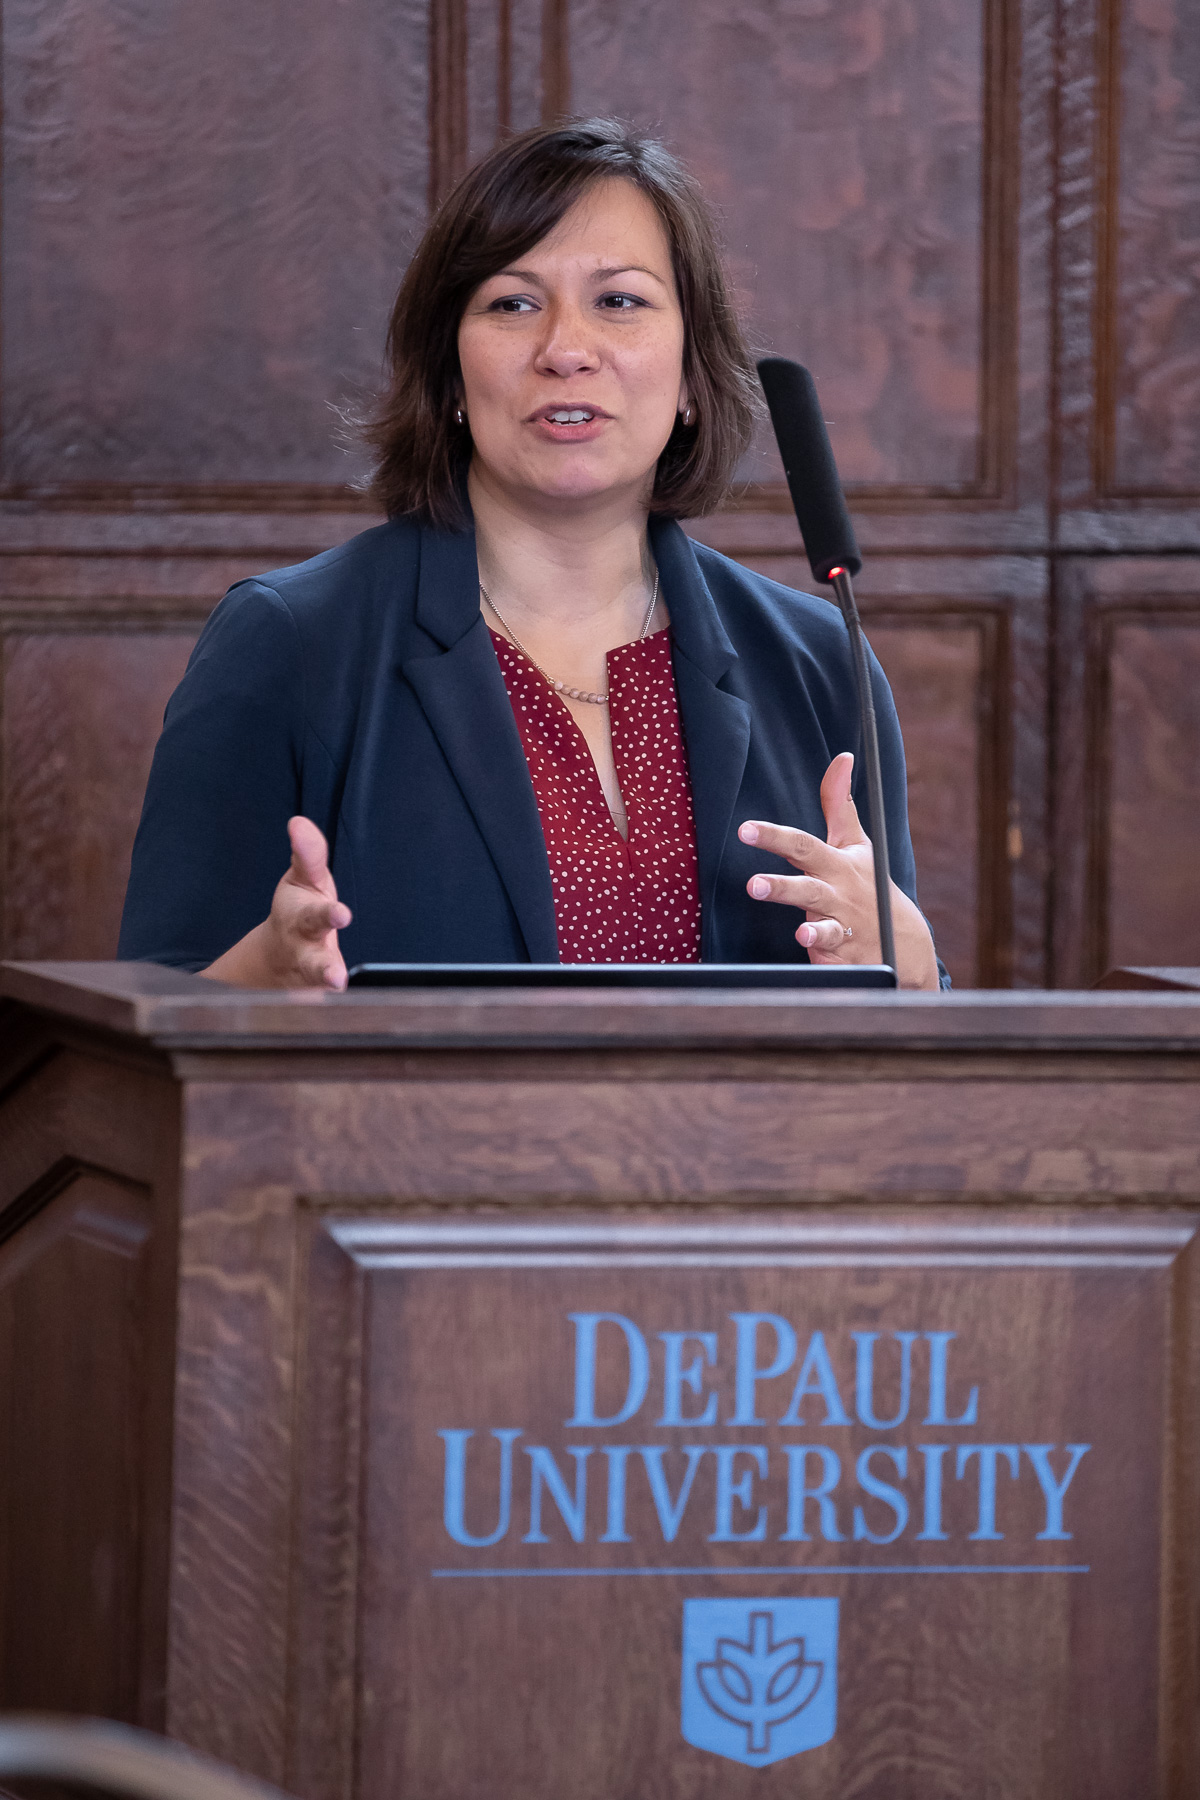 Rebecca Popelka, director of Community College Partnerships, spoke at the event in Cortelyou Commons. (DePaul University/Jeff Carrion)